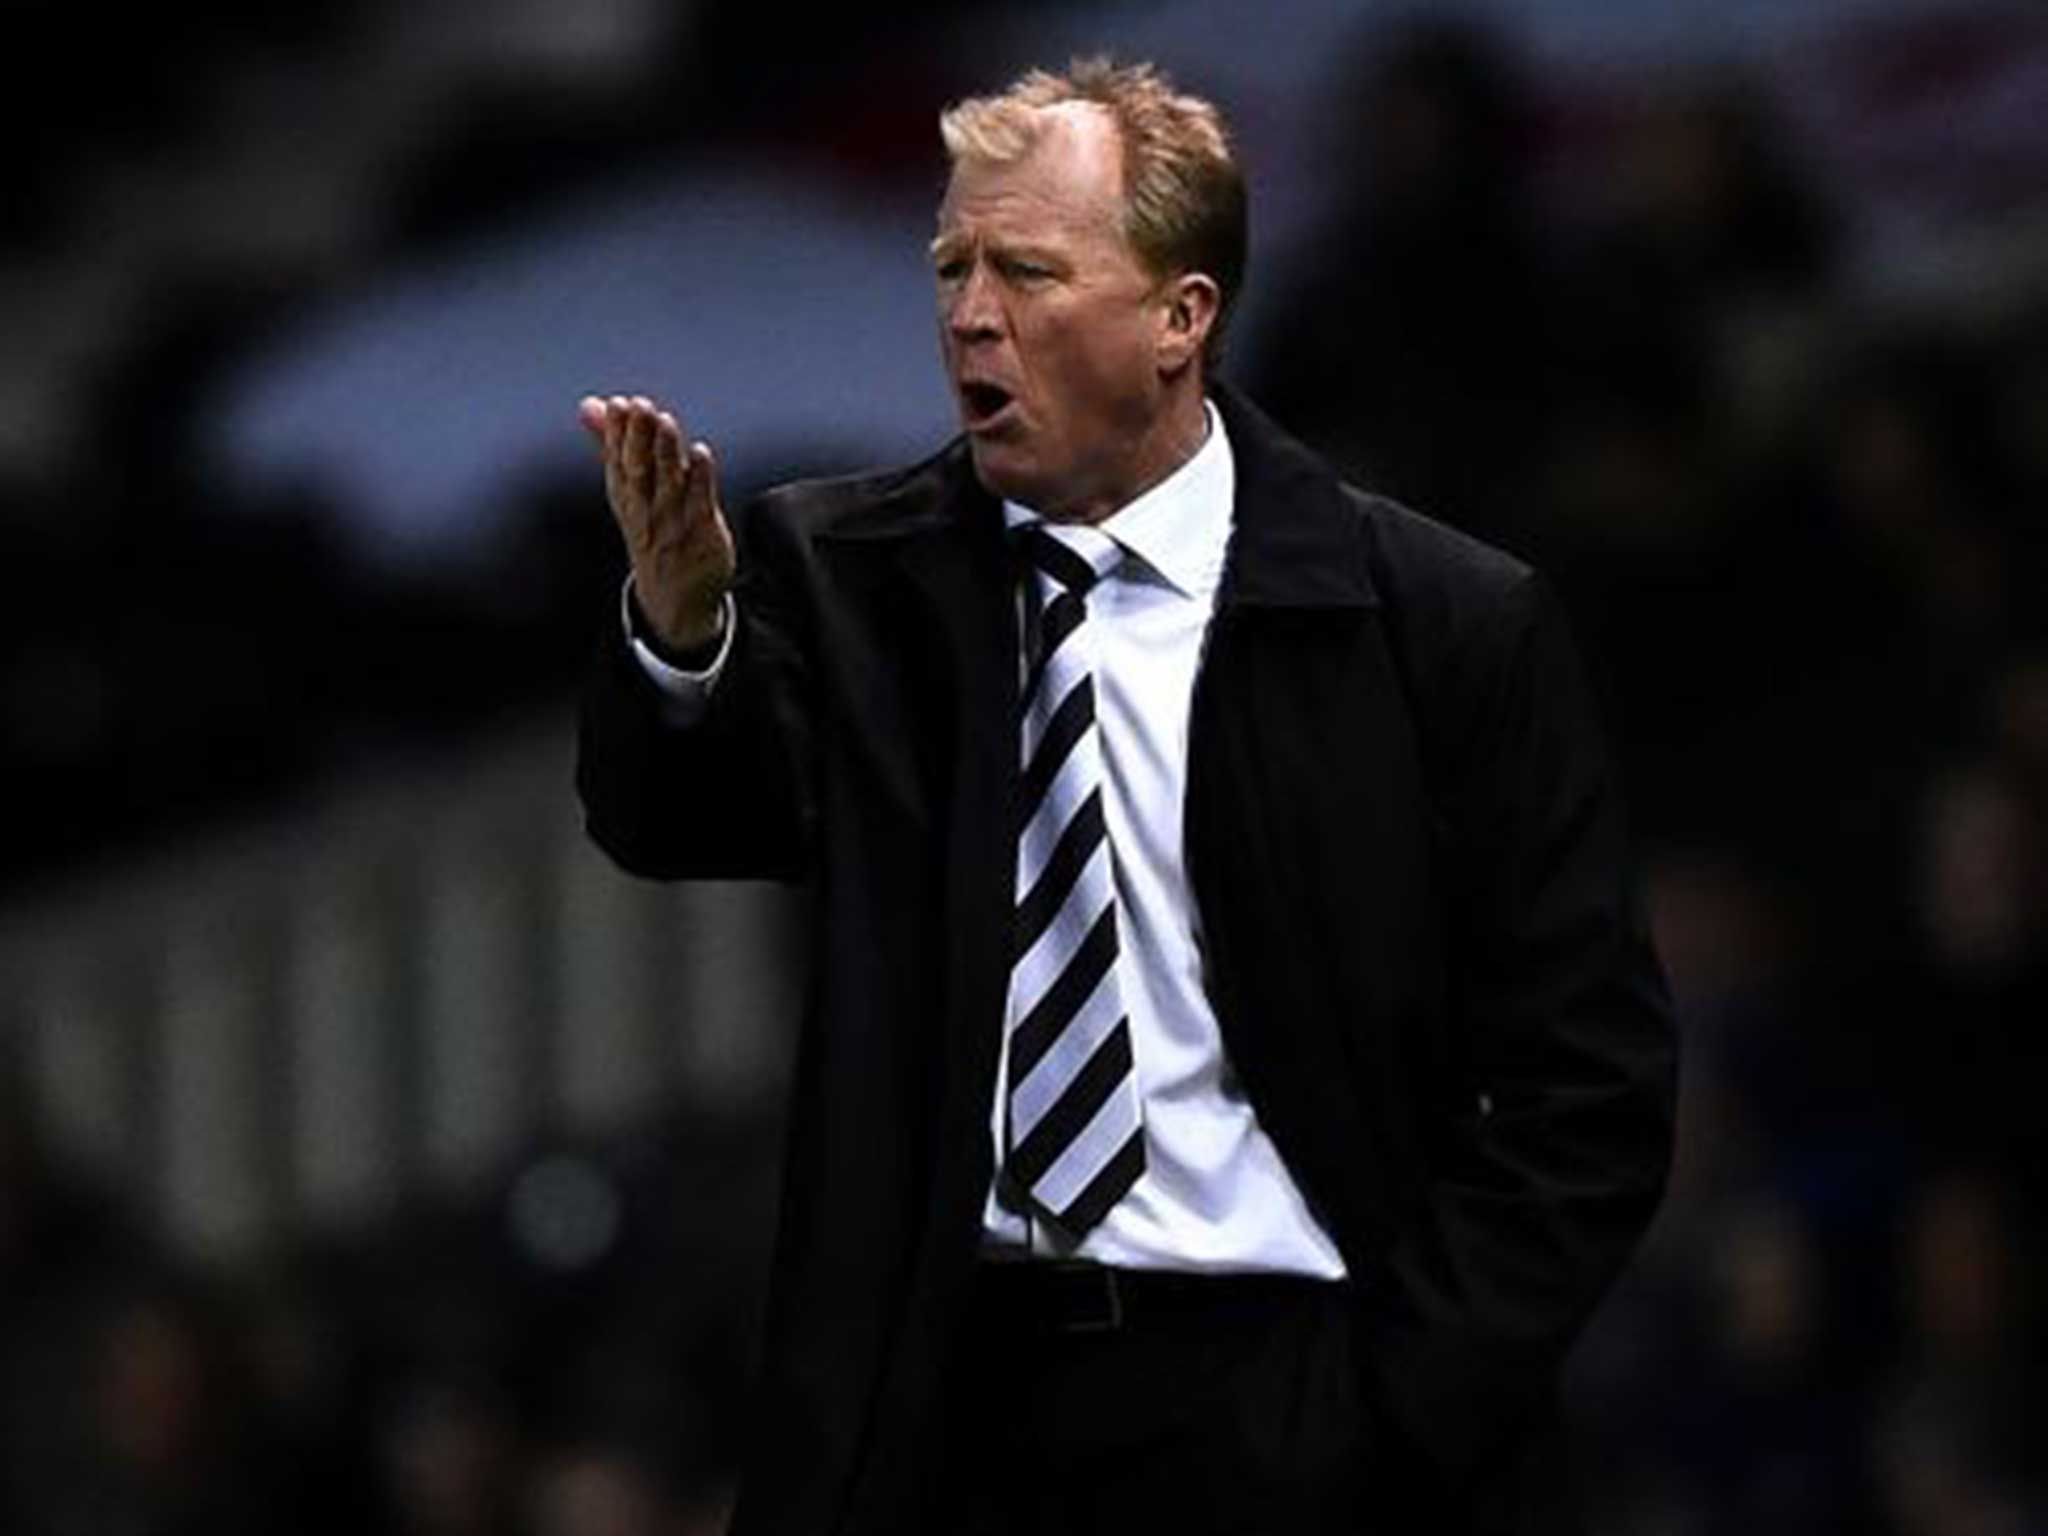 Newcastle twice made overtures to Steve McClaren in January after Alan Pardew left the club